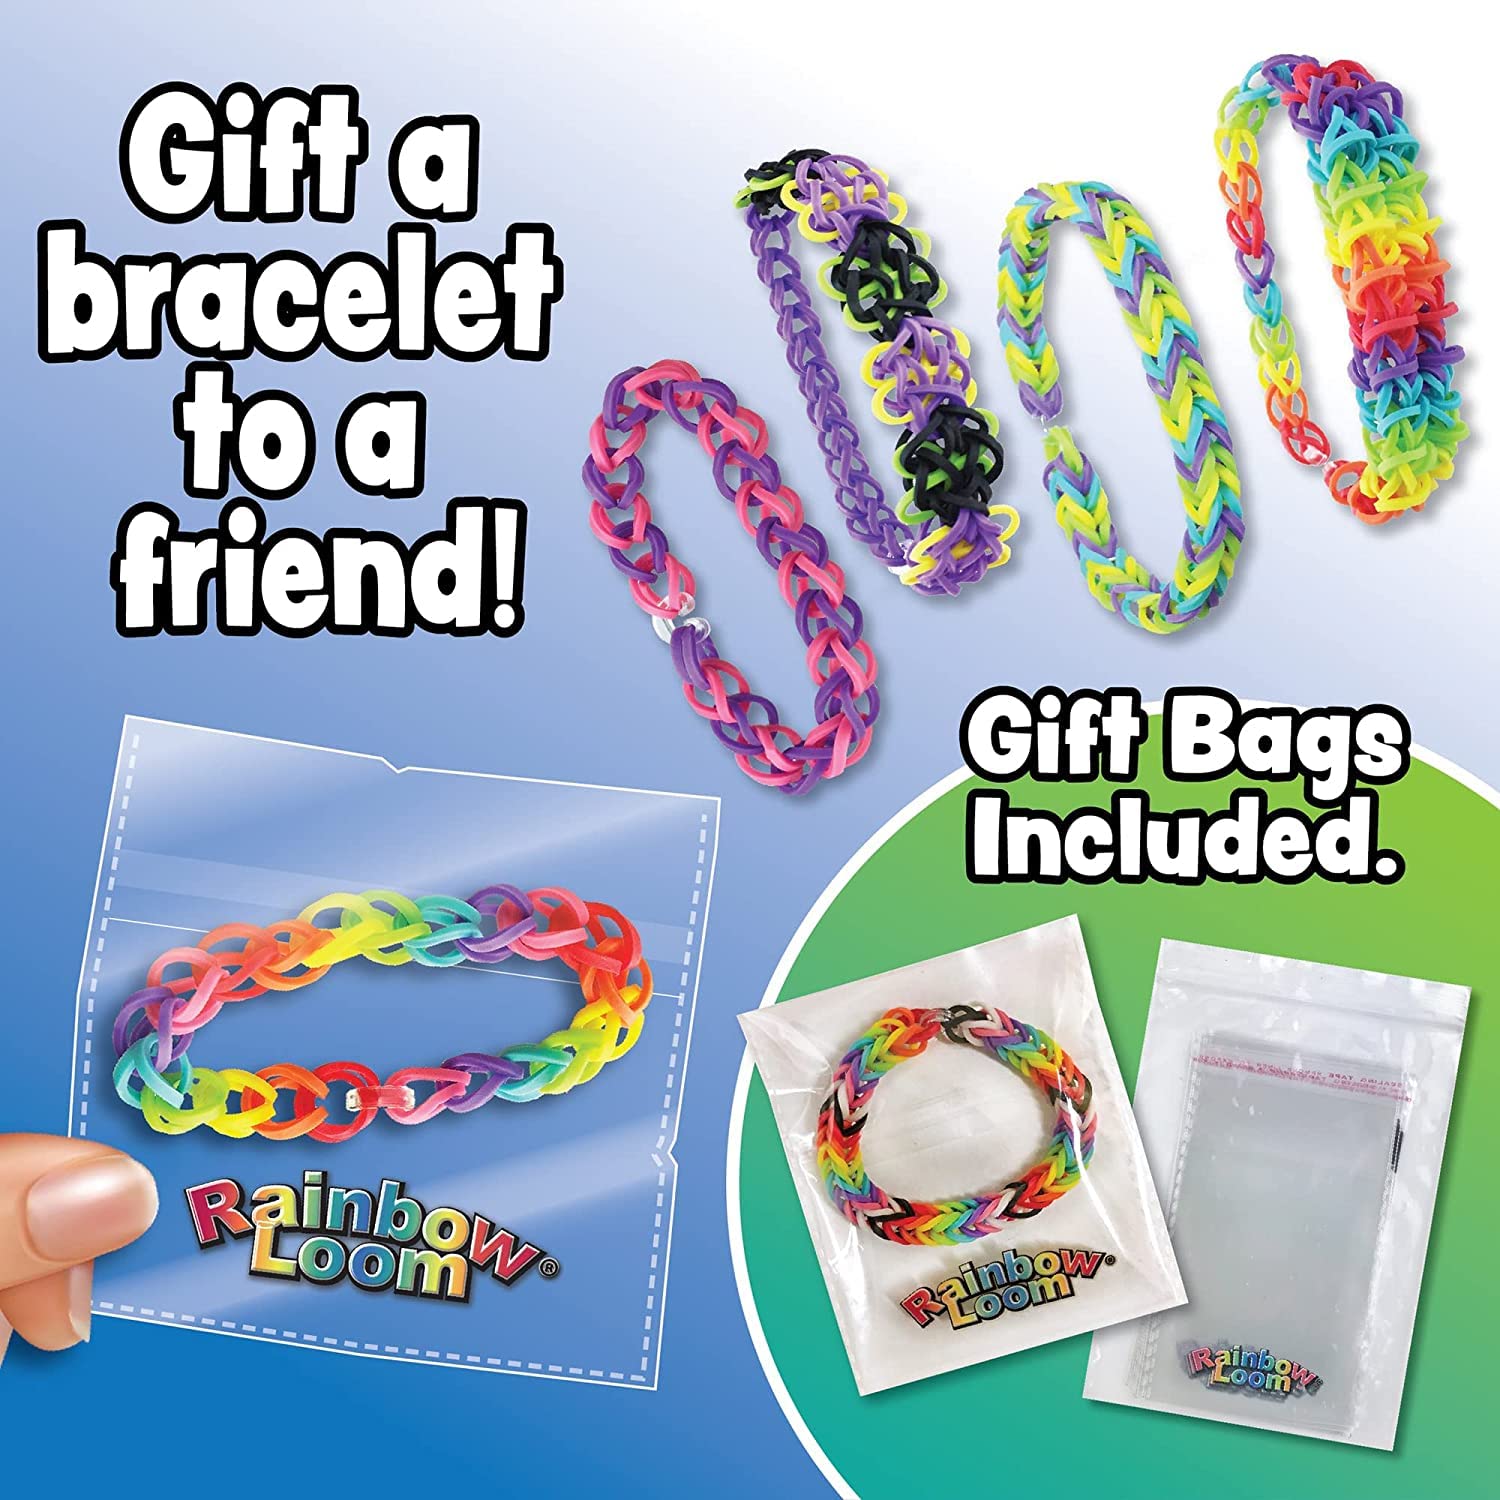 Rainbow Loom® MEGA Combo Set, Features 7000+ Colorful Rubber Bands, 2 step-by-step Bracelet Instructions, Organizer Case, Great Gift for Kids 7+ to Promote Fine Motor Skills